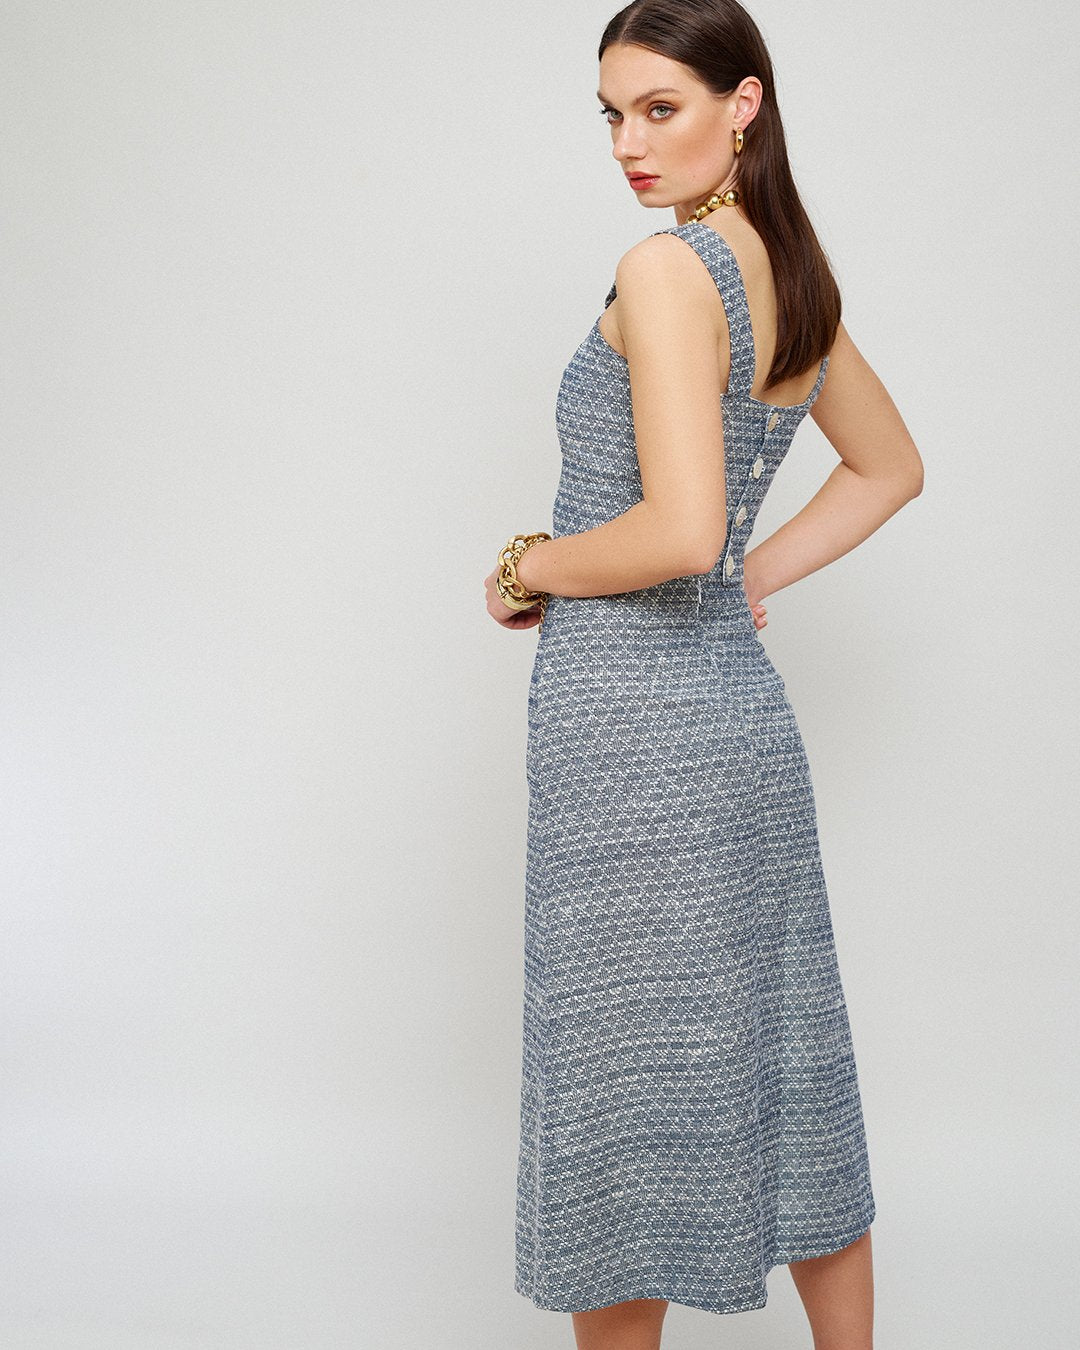 The A Line Skirt - AMILLI at LabelRow